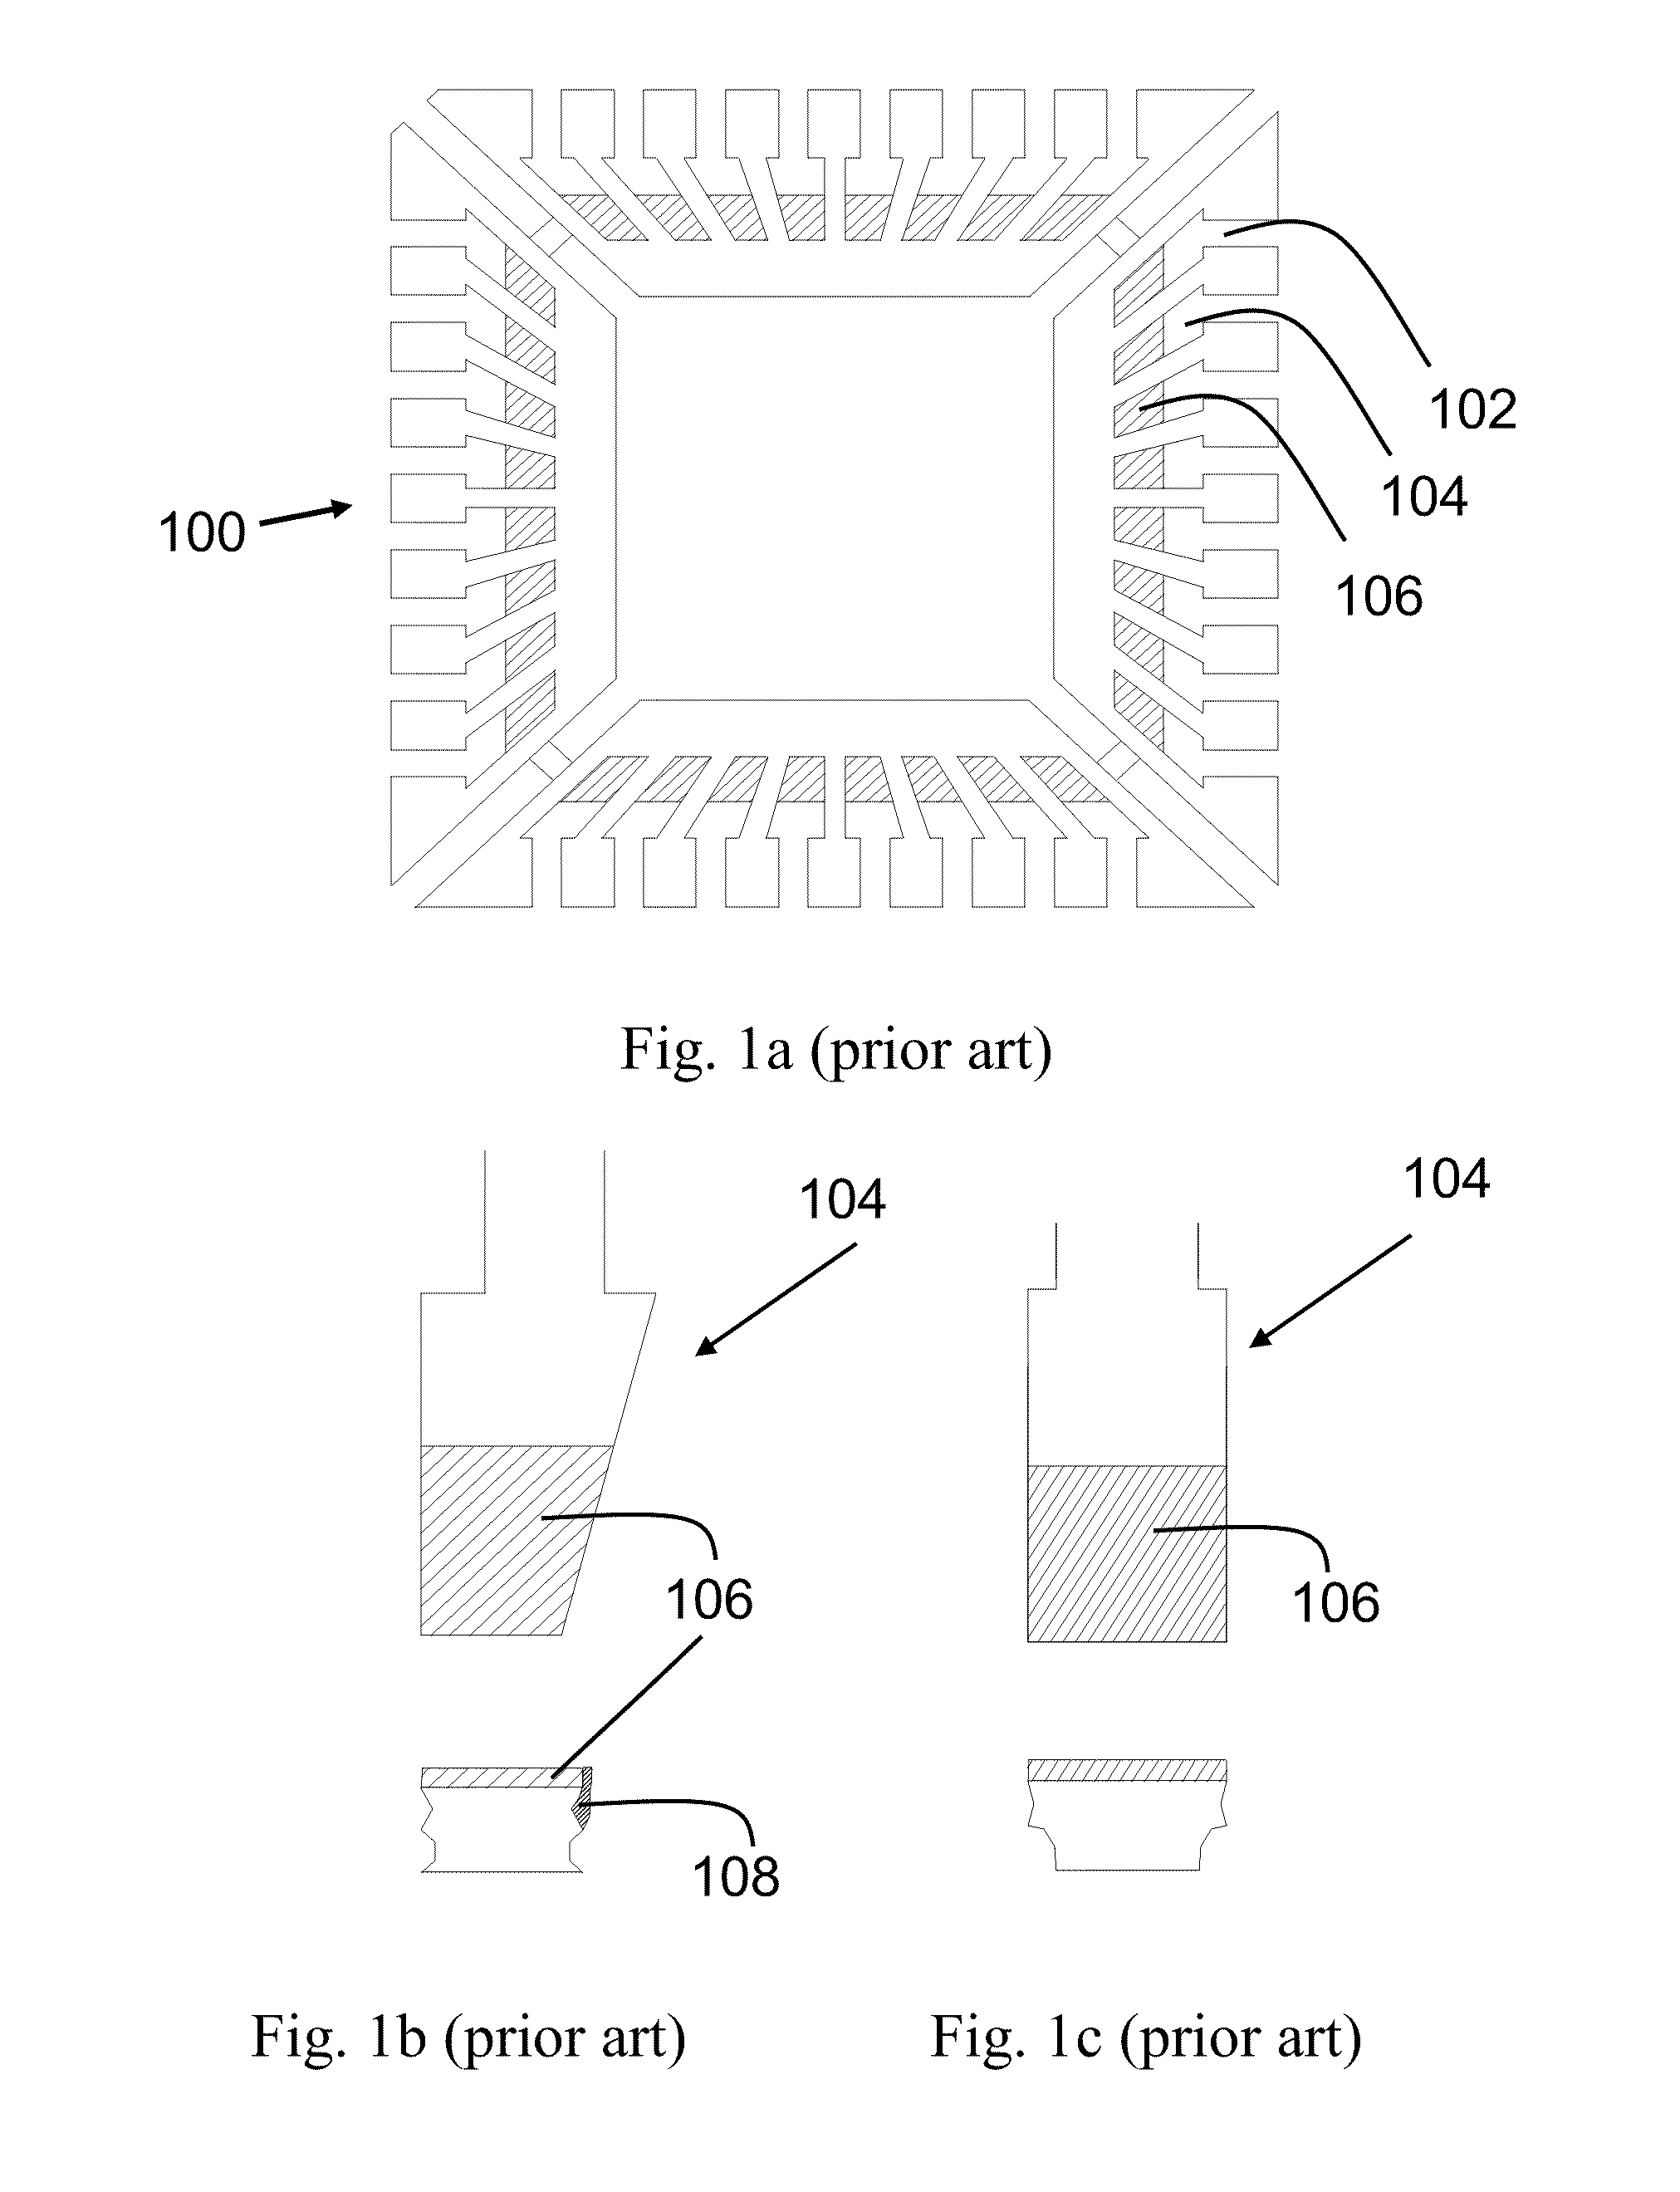 Enhanced integrated circuit package